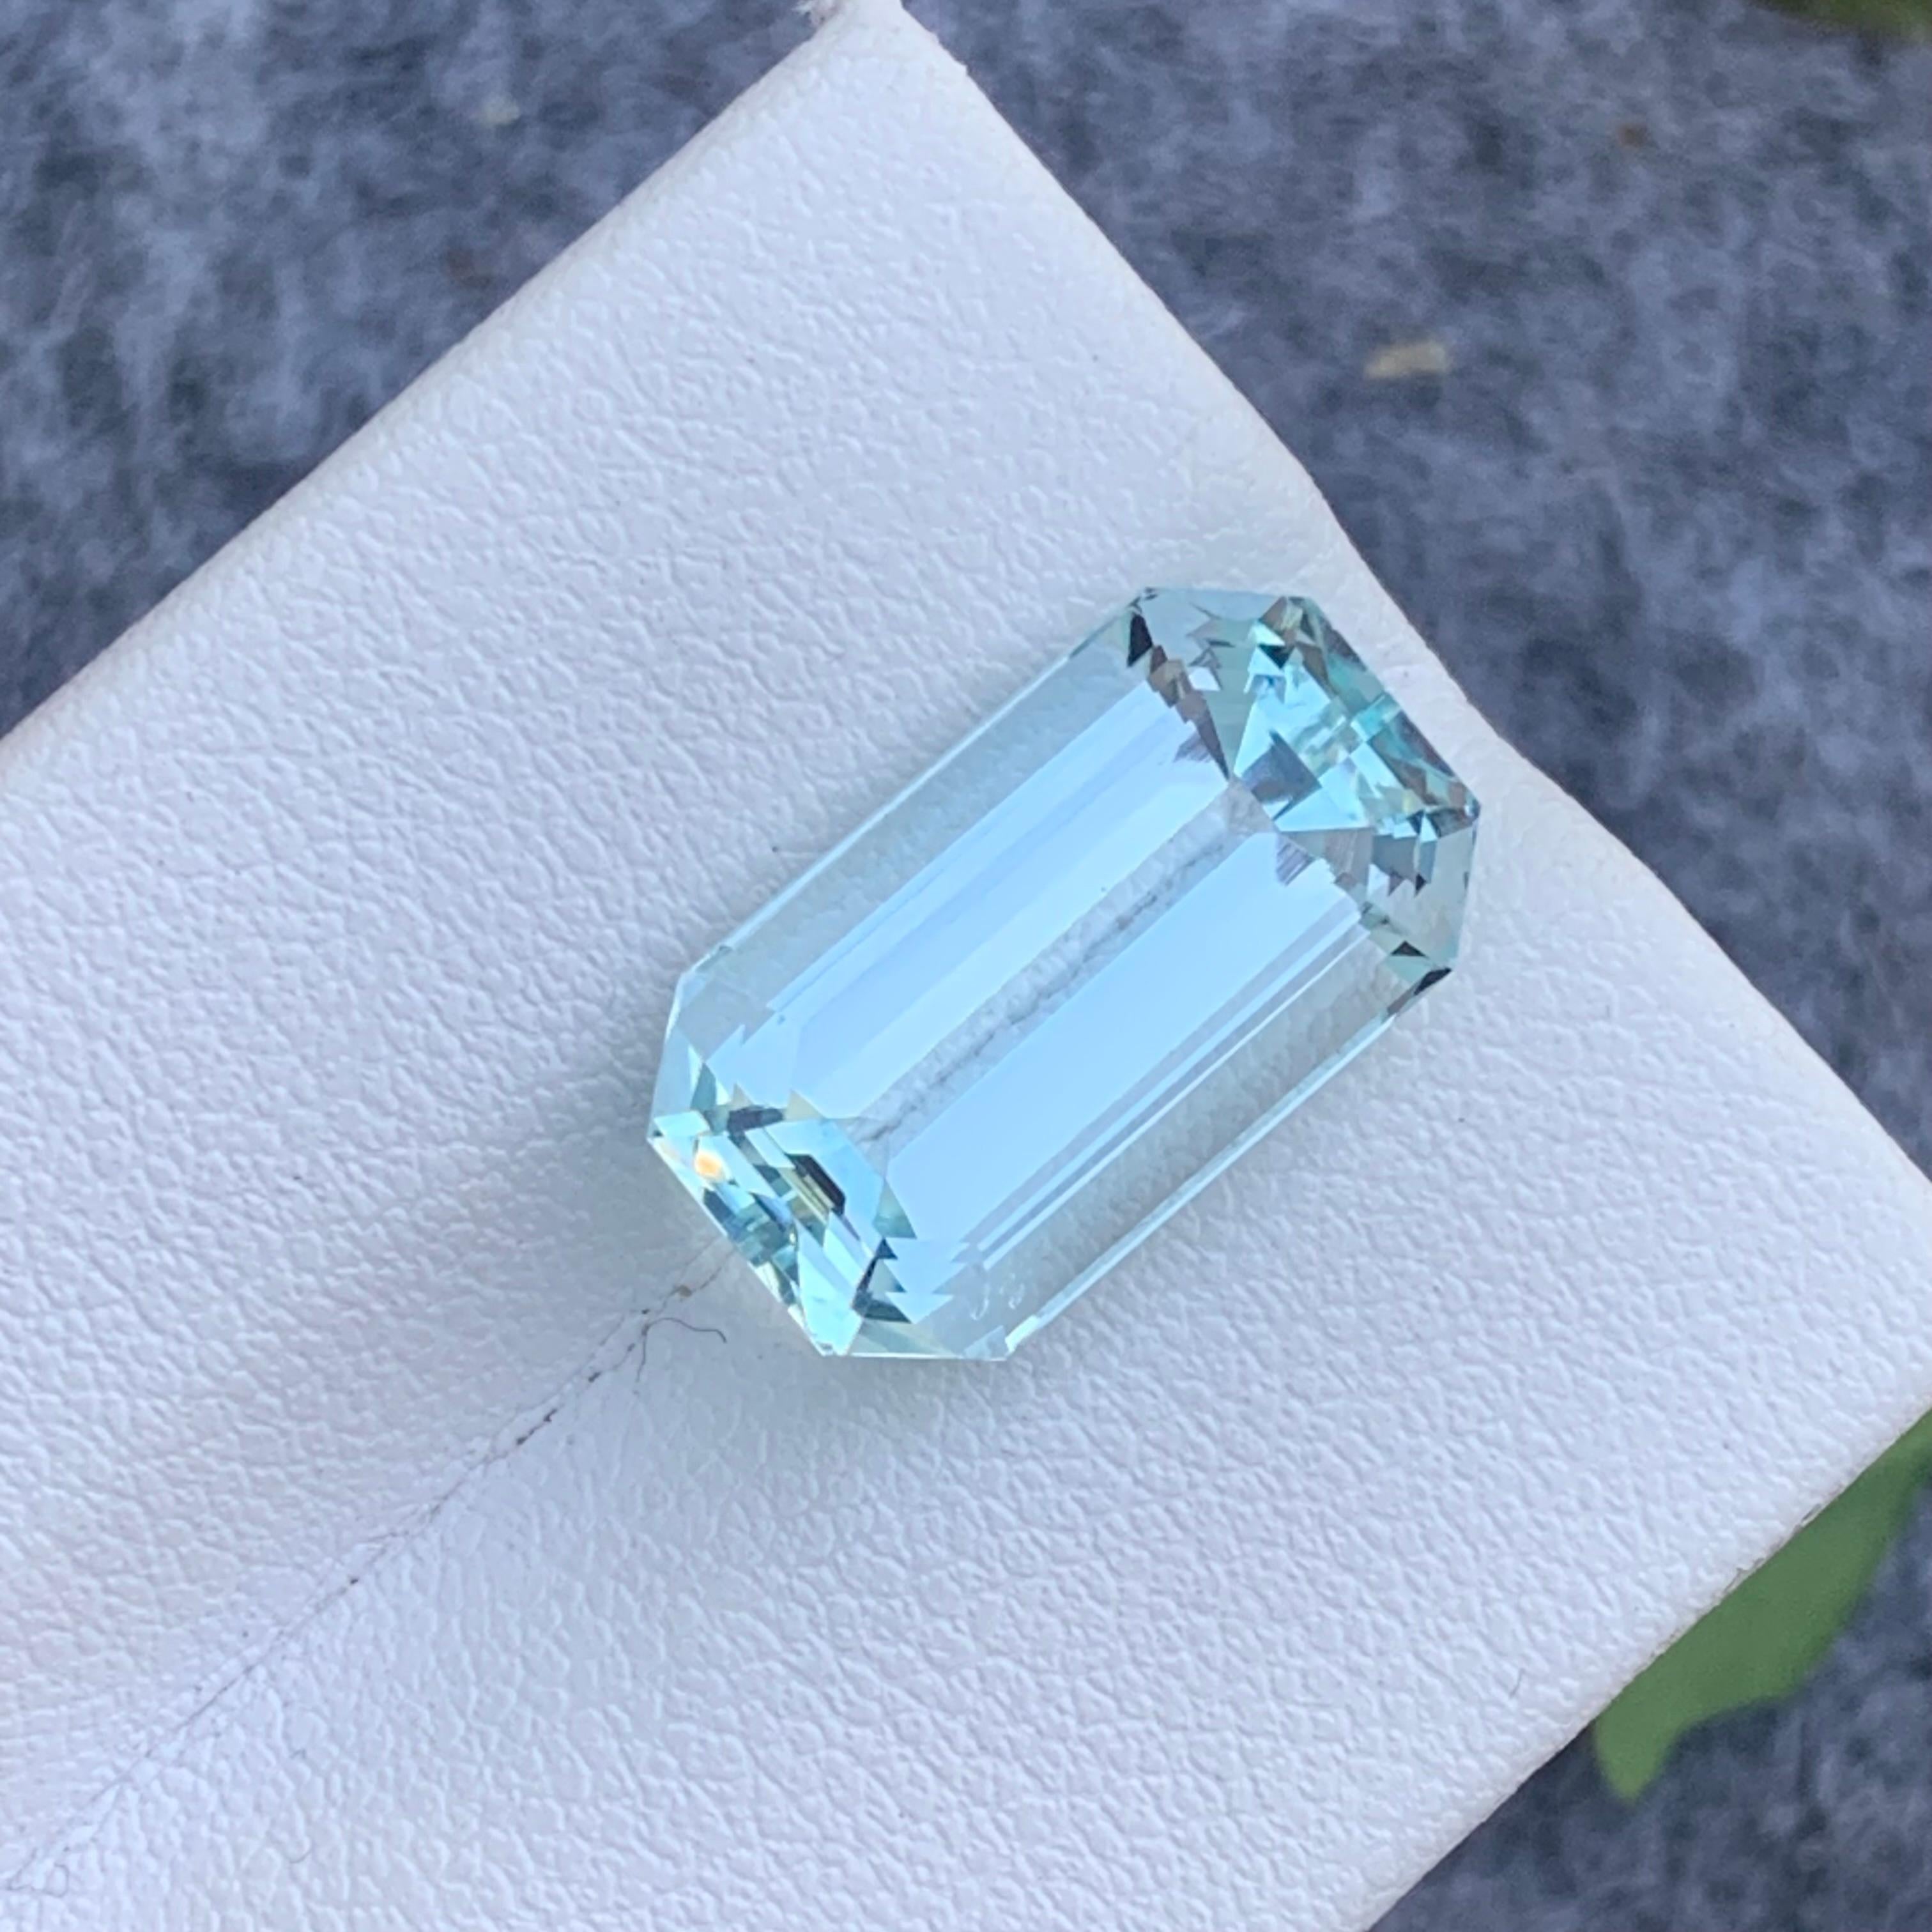 Gemstone Type : Aquamarine
Weight : 8.55 Carats
Dimensions : 15.9x9.2x7.5 mm
Clarity : Eye Clean
Origin : Pakistan
Shape: Emerald
Color: Light Blue
Certificate: On Demand
Birthstone Month: March
It has a shielding effect on your energy field and has